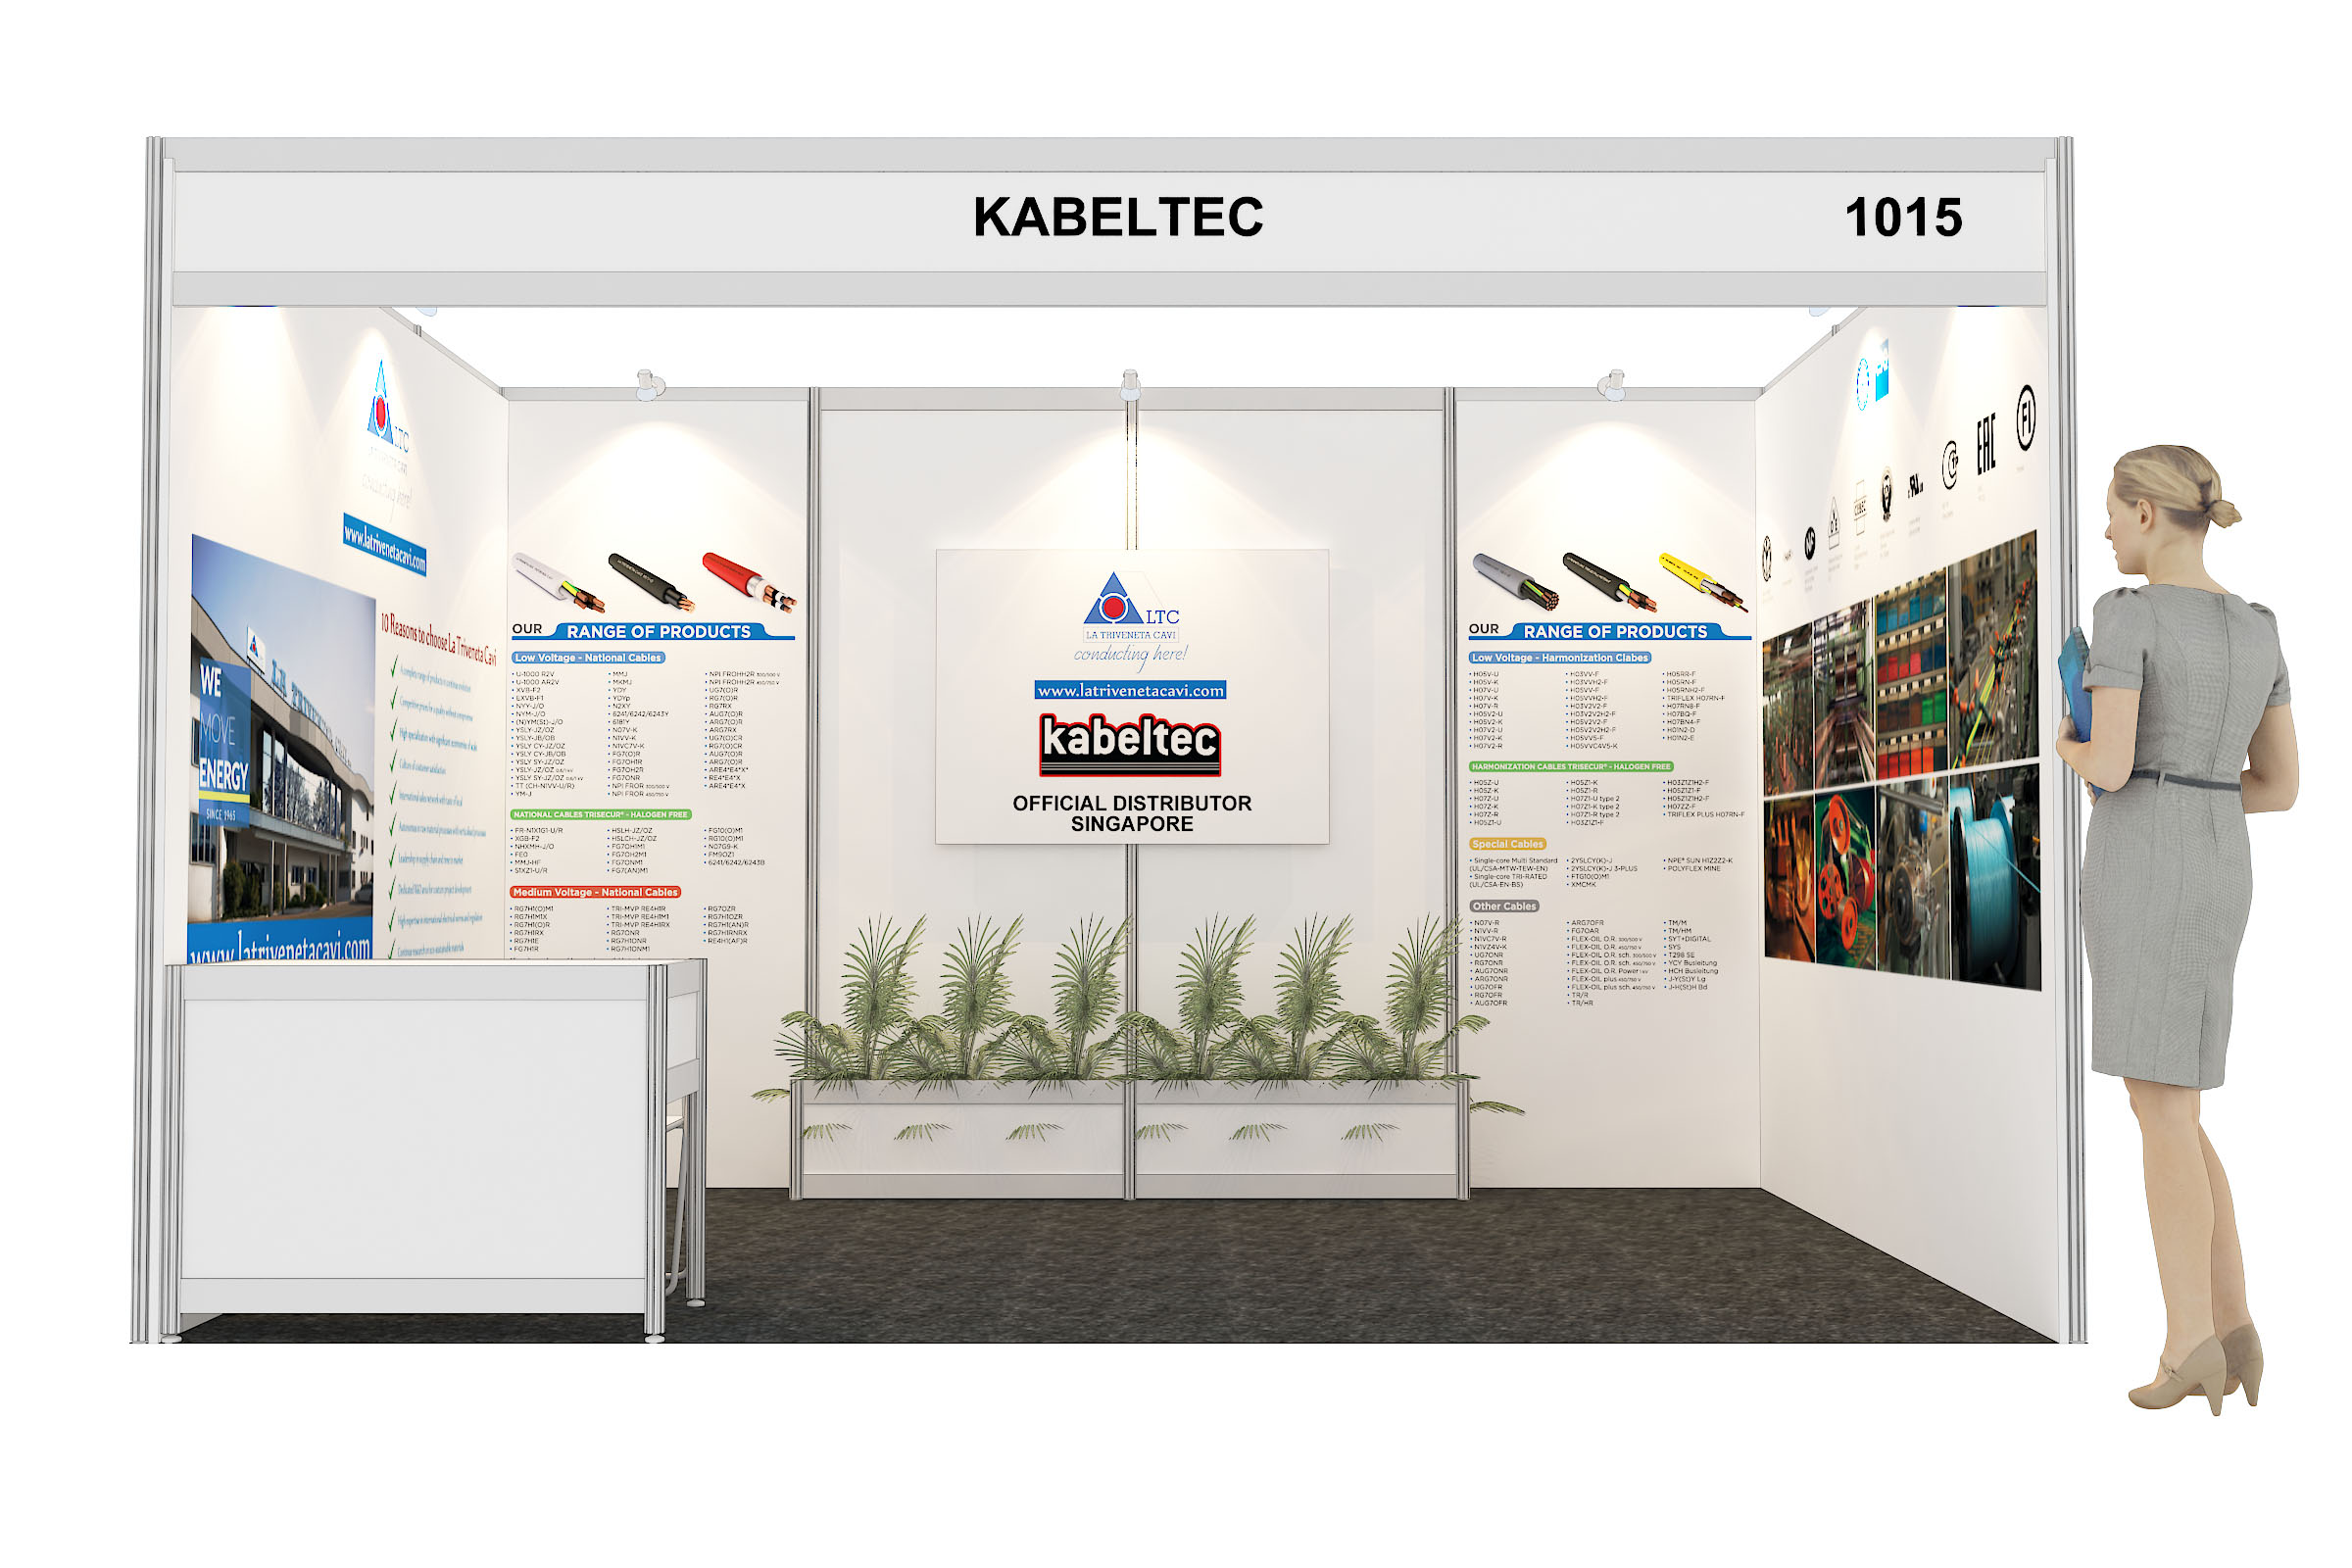 Kabeltec booth to EPRE 2017 exhibition in Malaysia